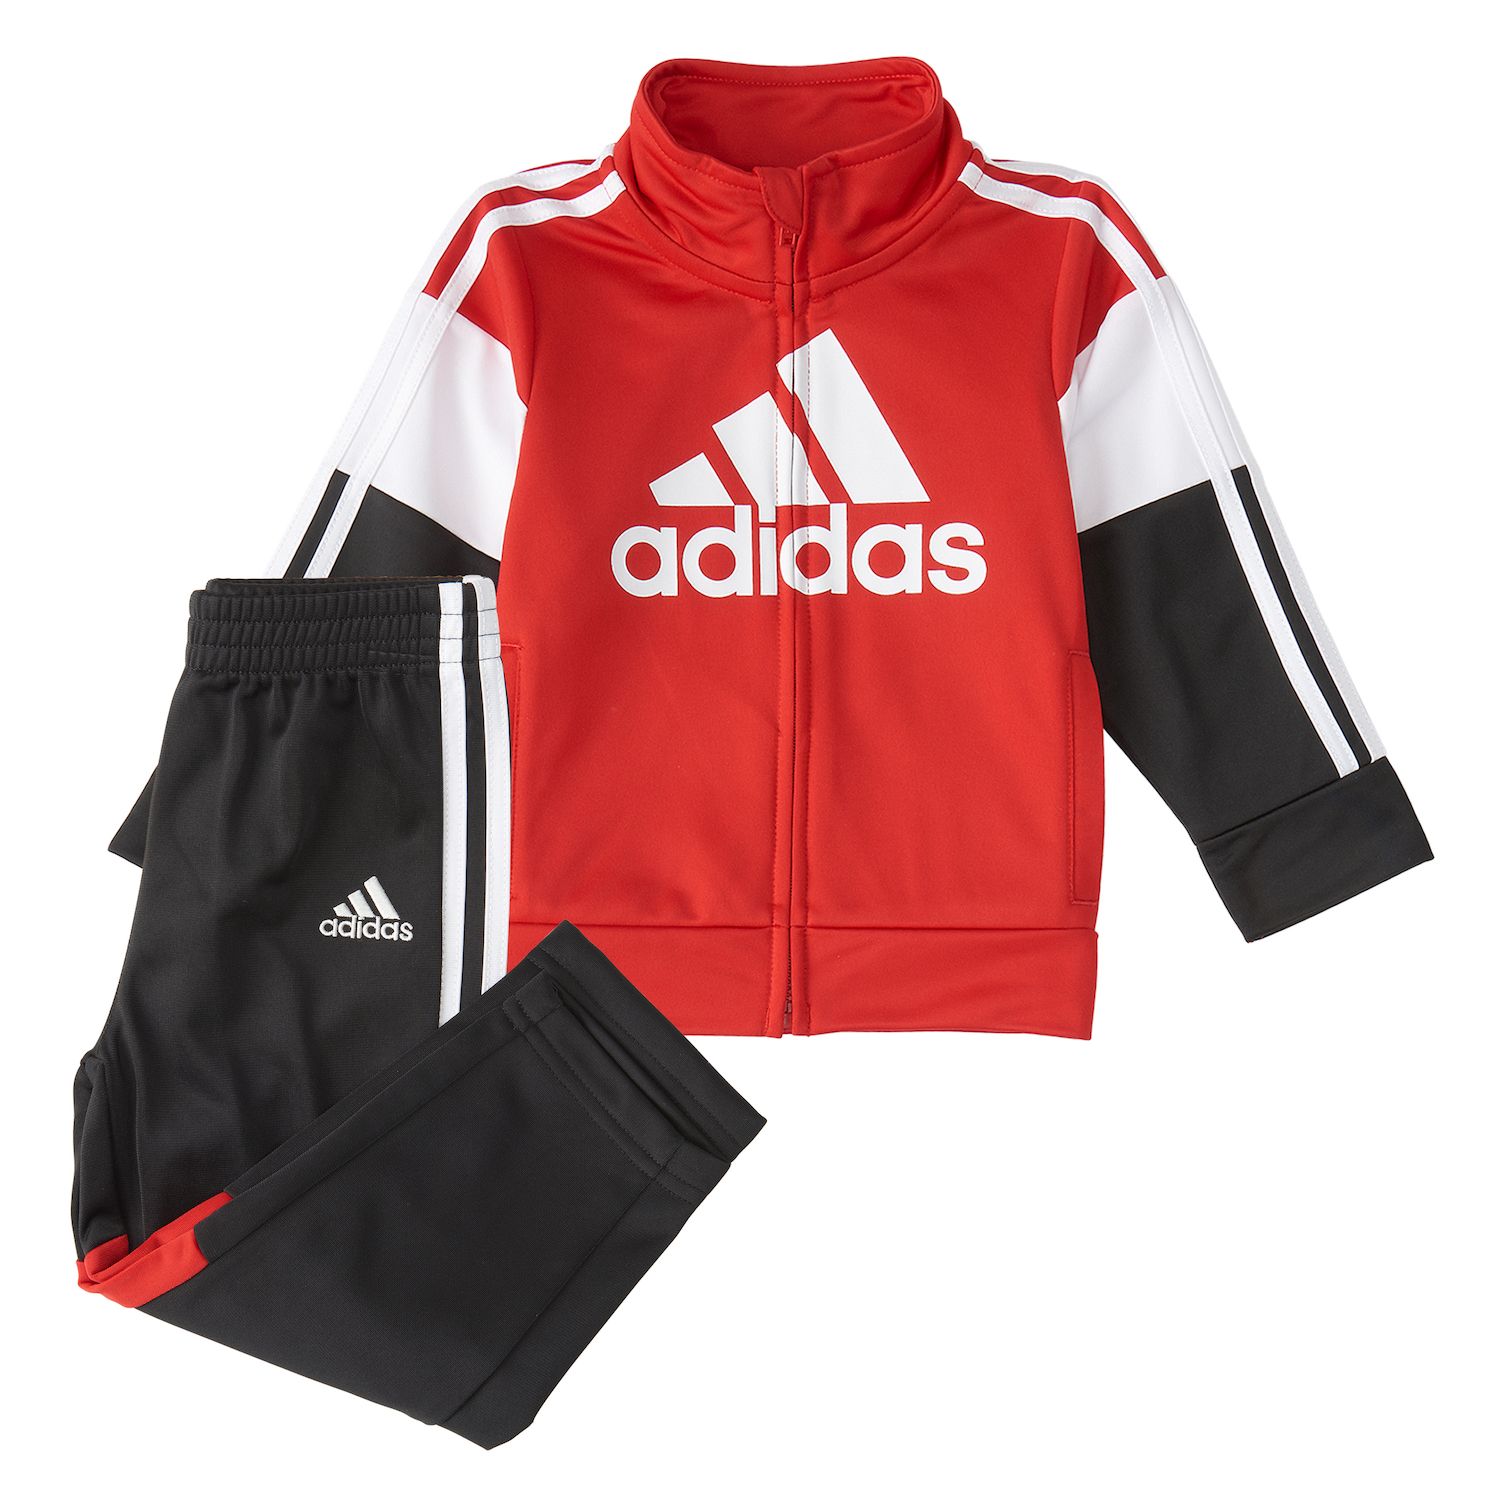 adidas baby clothes online